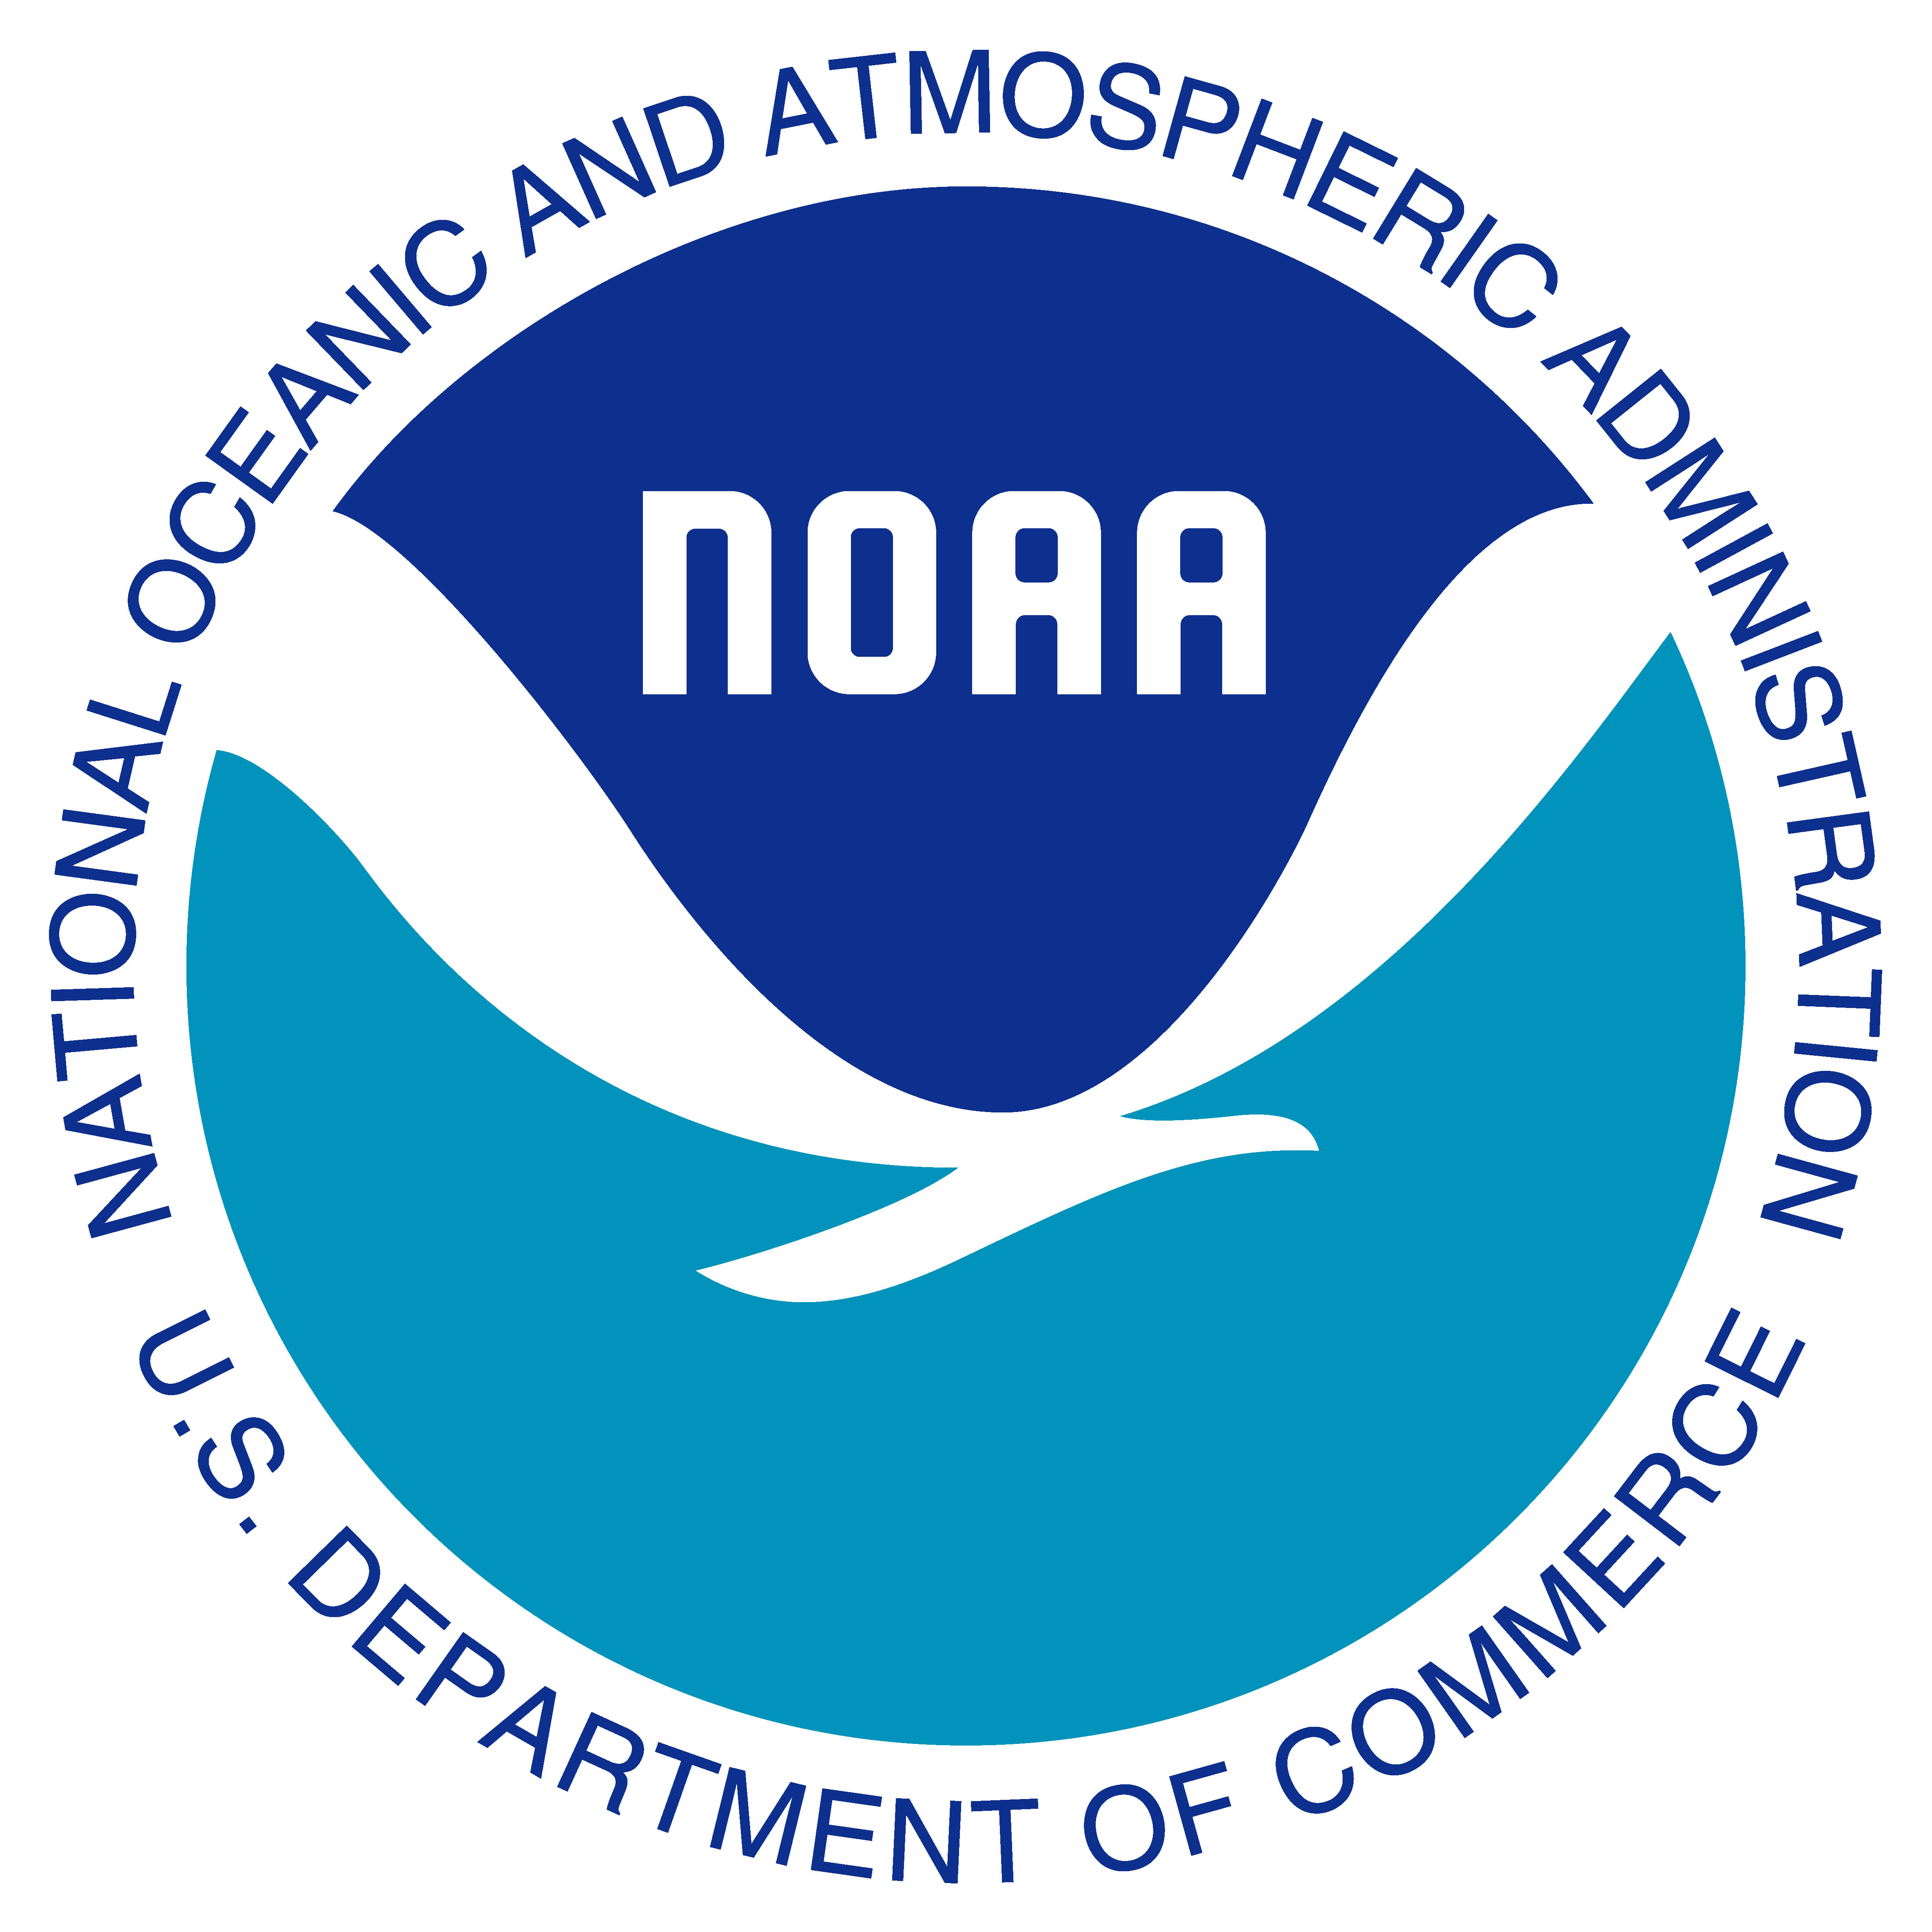 Bronze Sponsor: National Oceanic and Atmospheric Administration